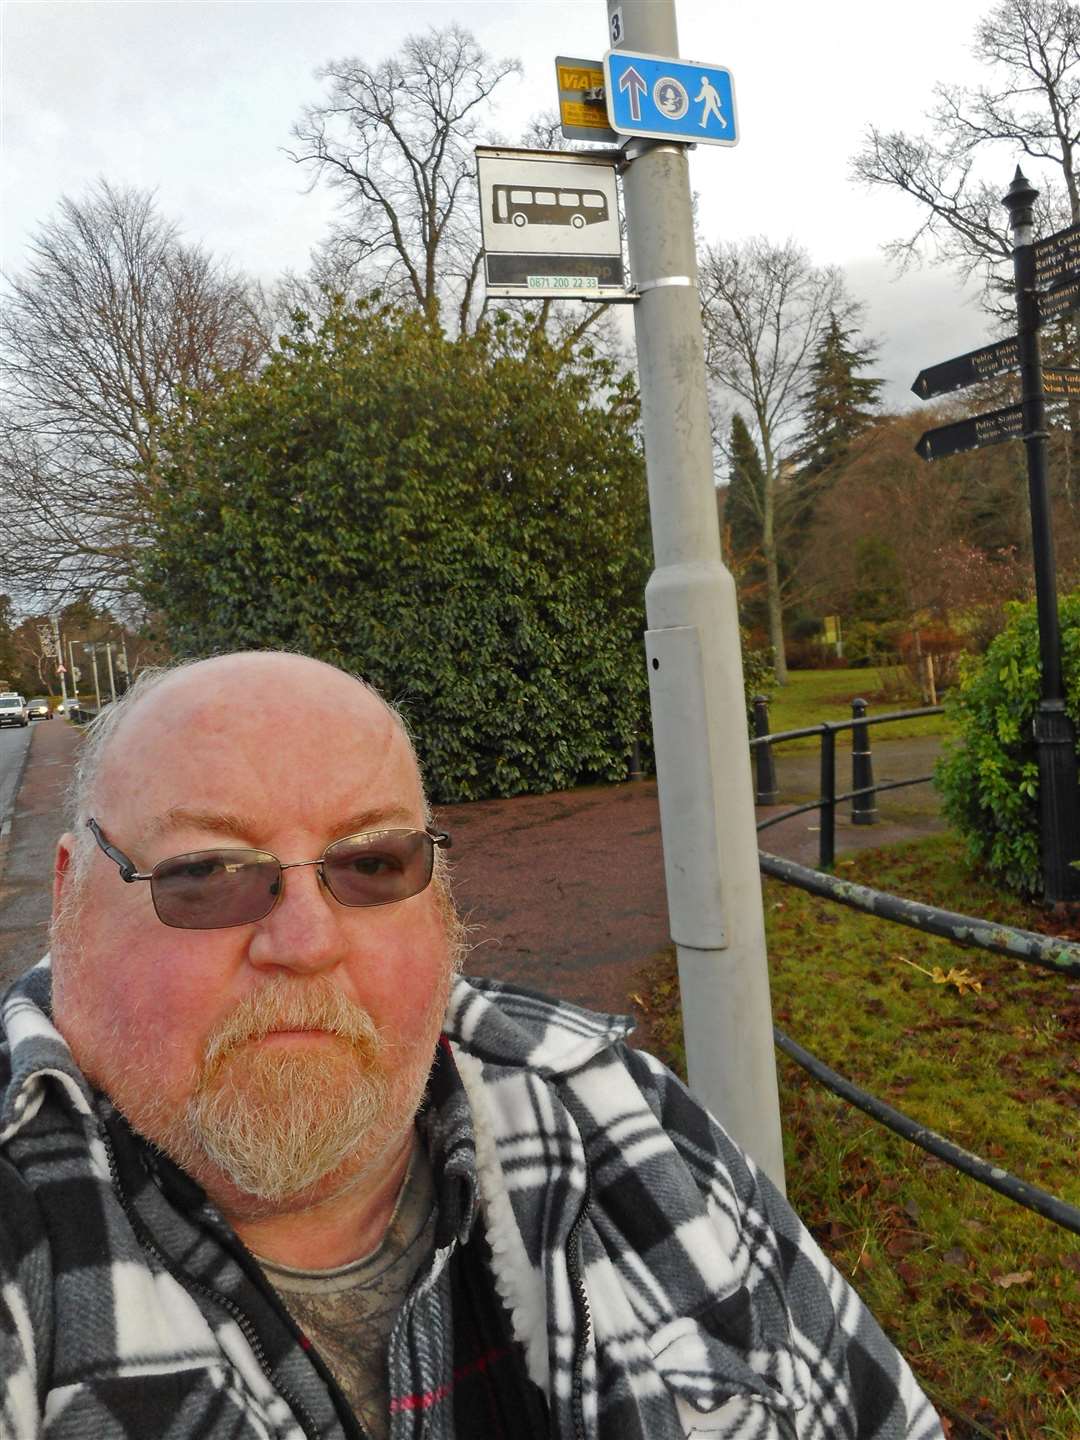 Community councillor and wheelchair user Ken Shand at the new bus stop on Victoria Road.